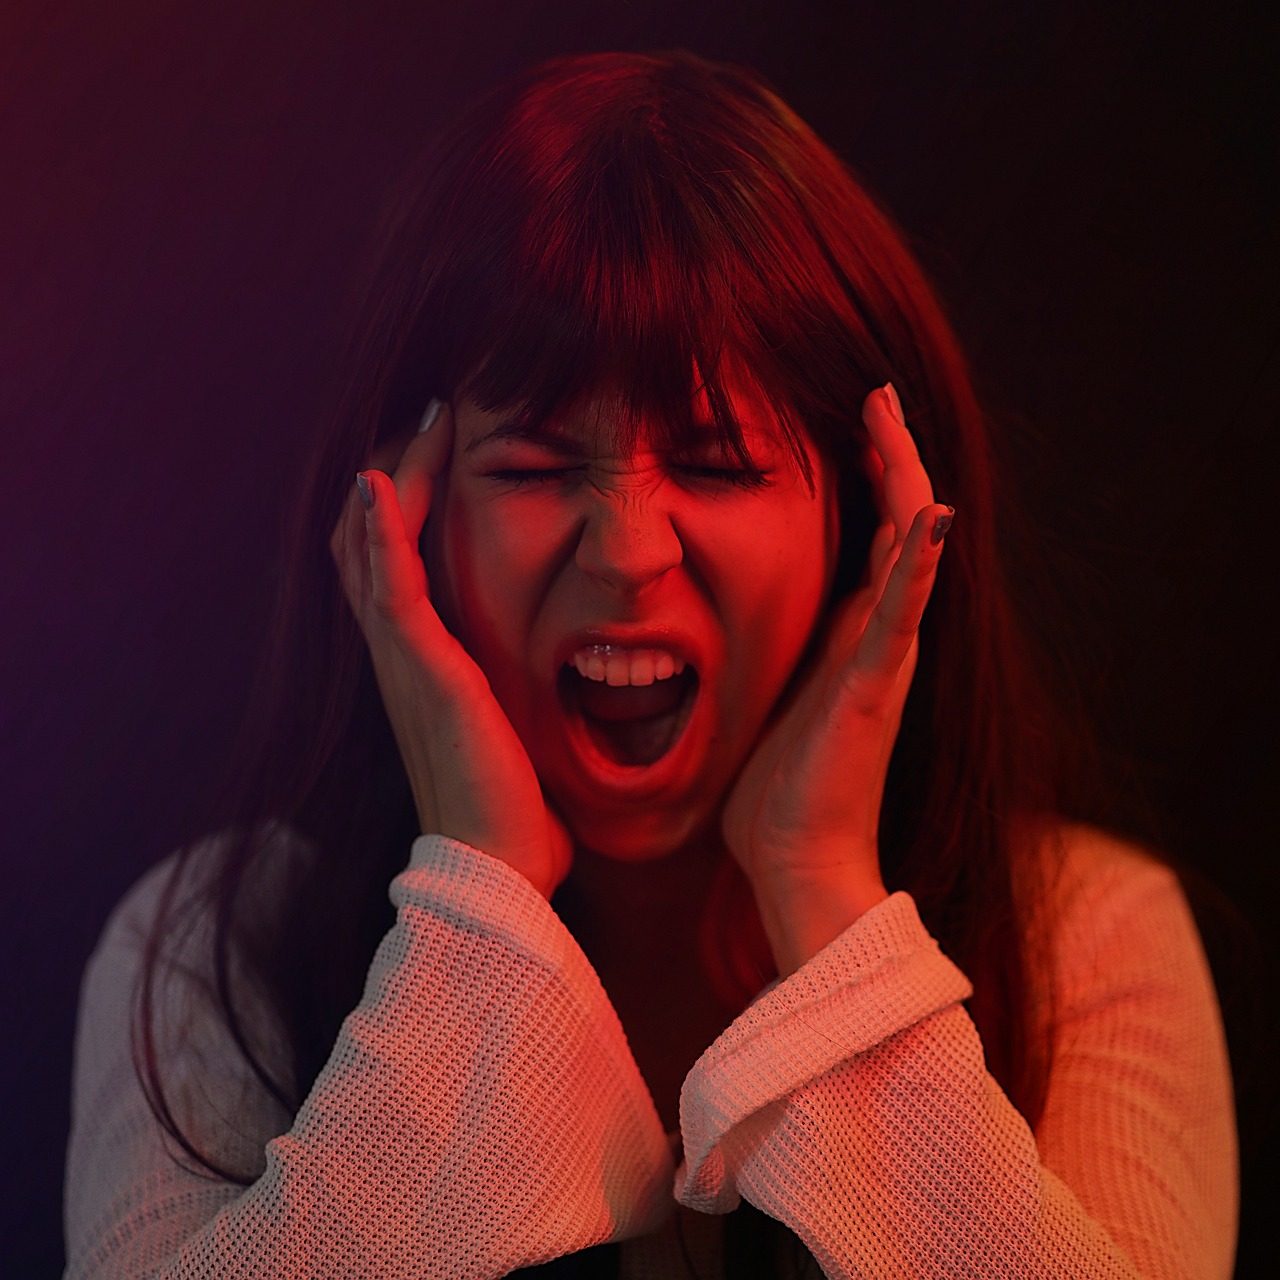 An image of a woman not practicing vocal cord care by screaming.